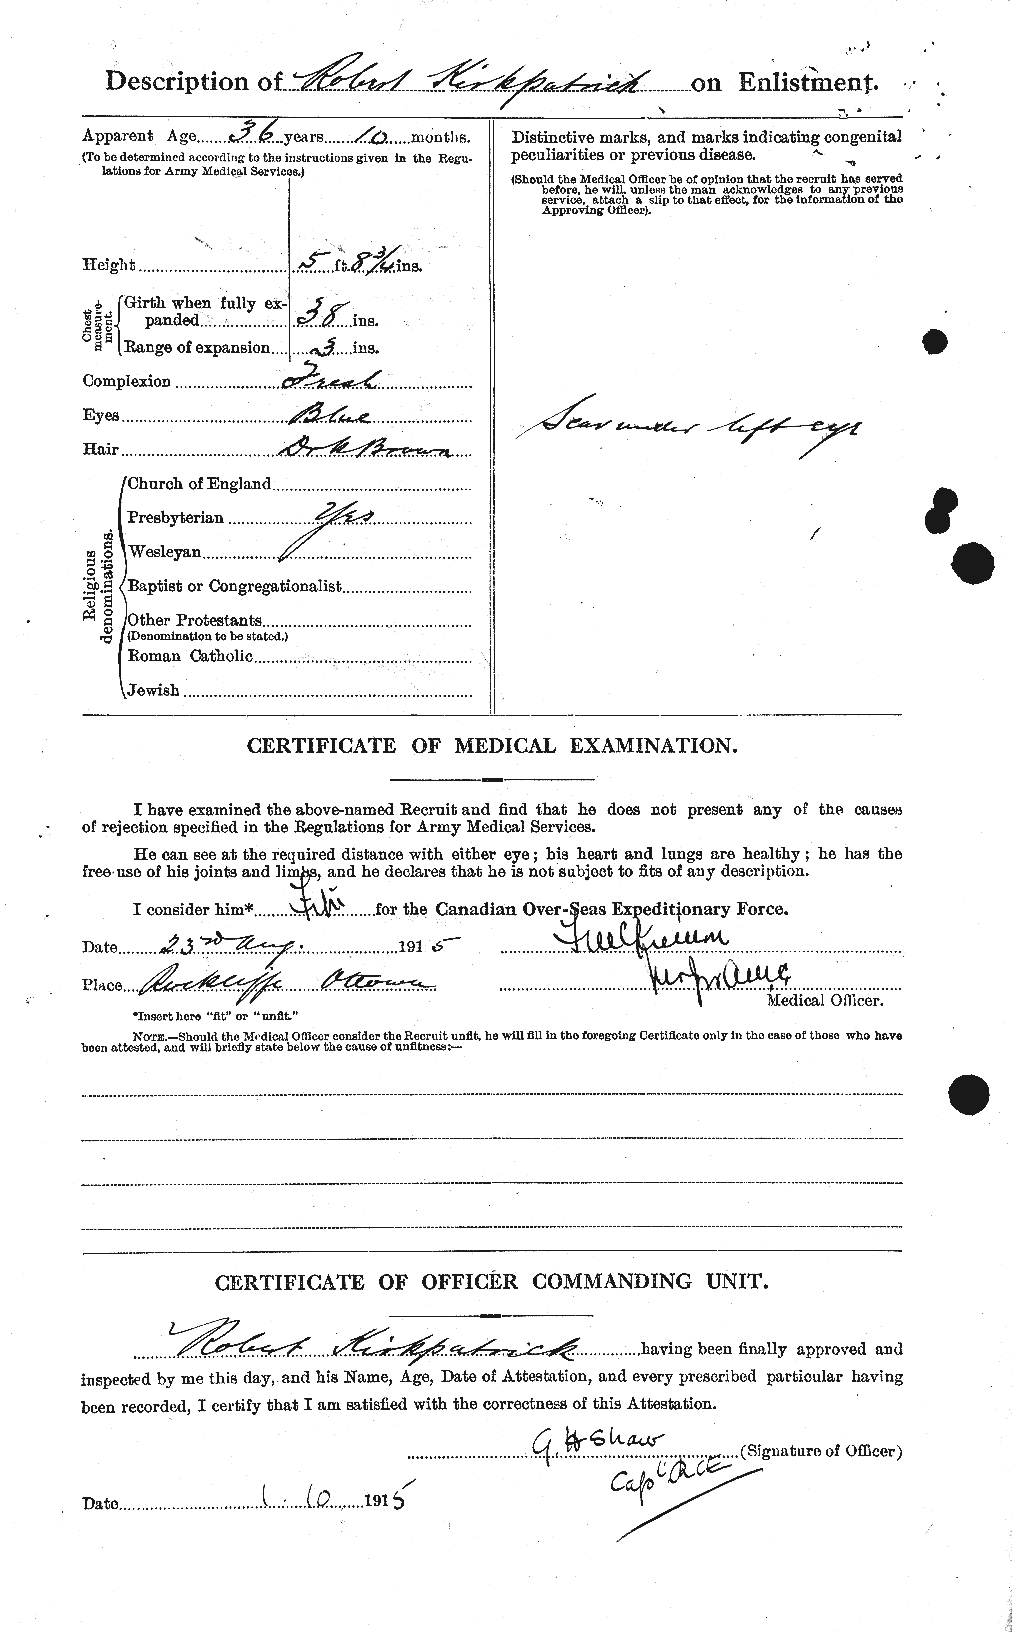 Personnel Records of the First World War - CEF 436107b